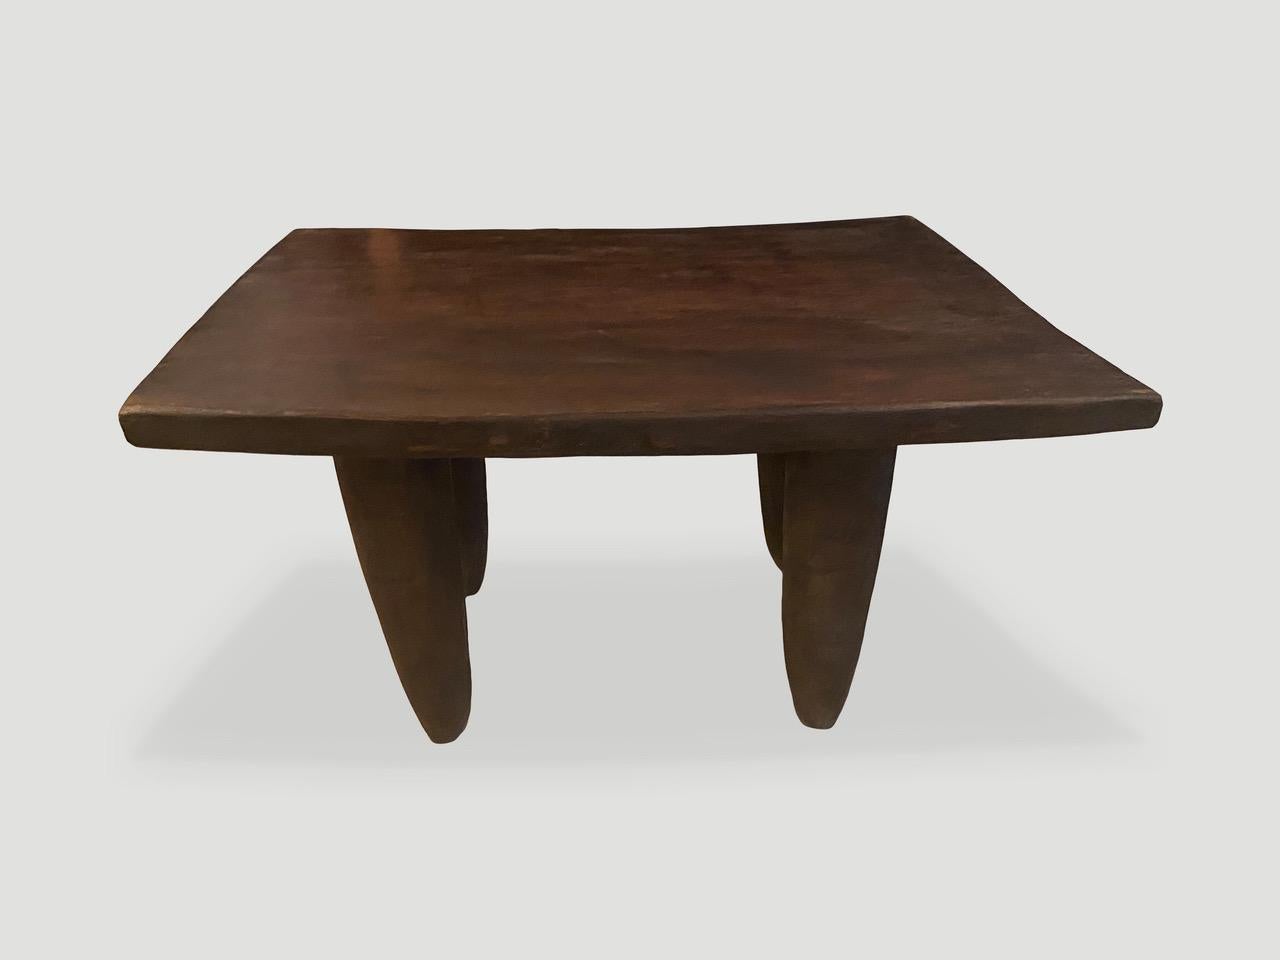 Antique coffee table hand carved by the Senufo tribes from a single block of Iroko wood, native to the west coast of Africa. The wood is tough, dense and very durable. Shown with cone style legs. We only source the best. This one is beautiful, wider